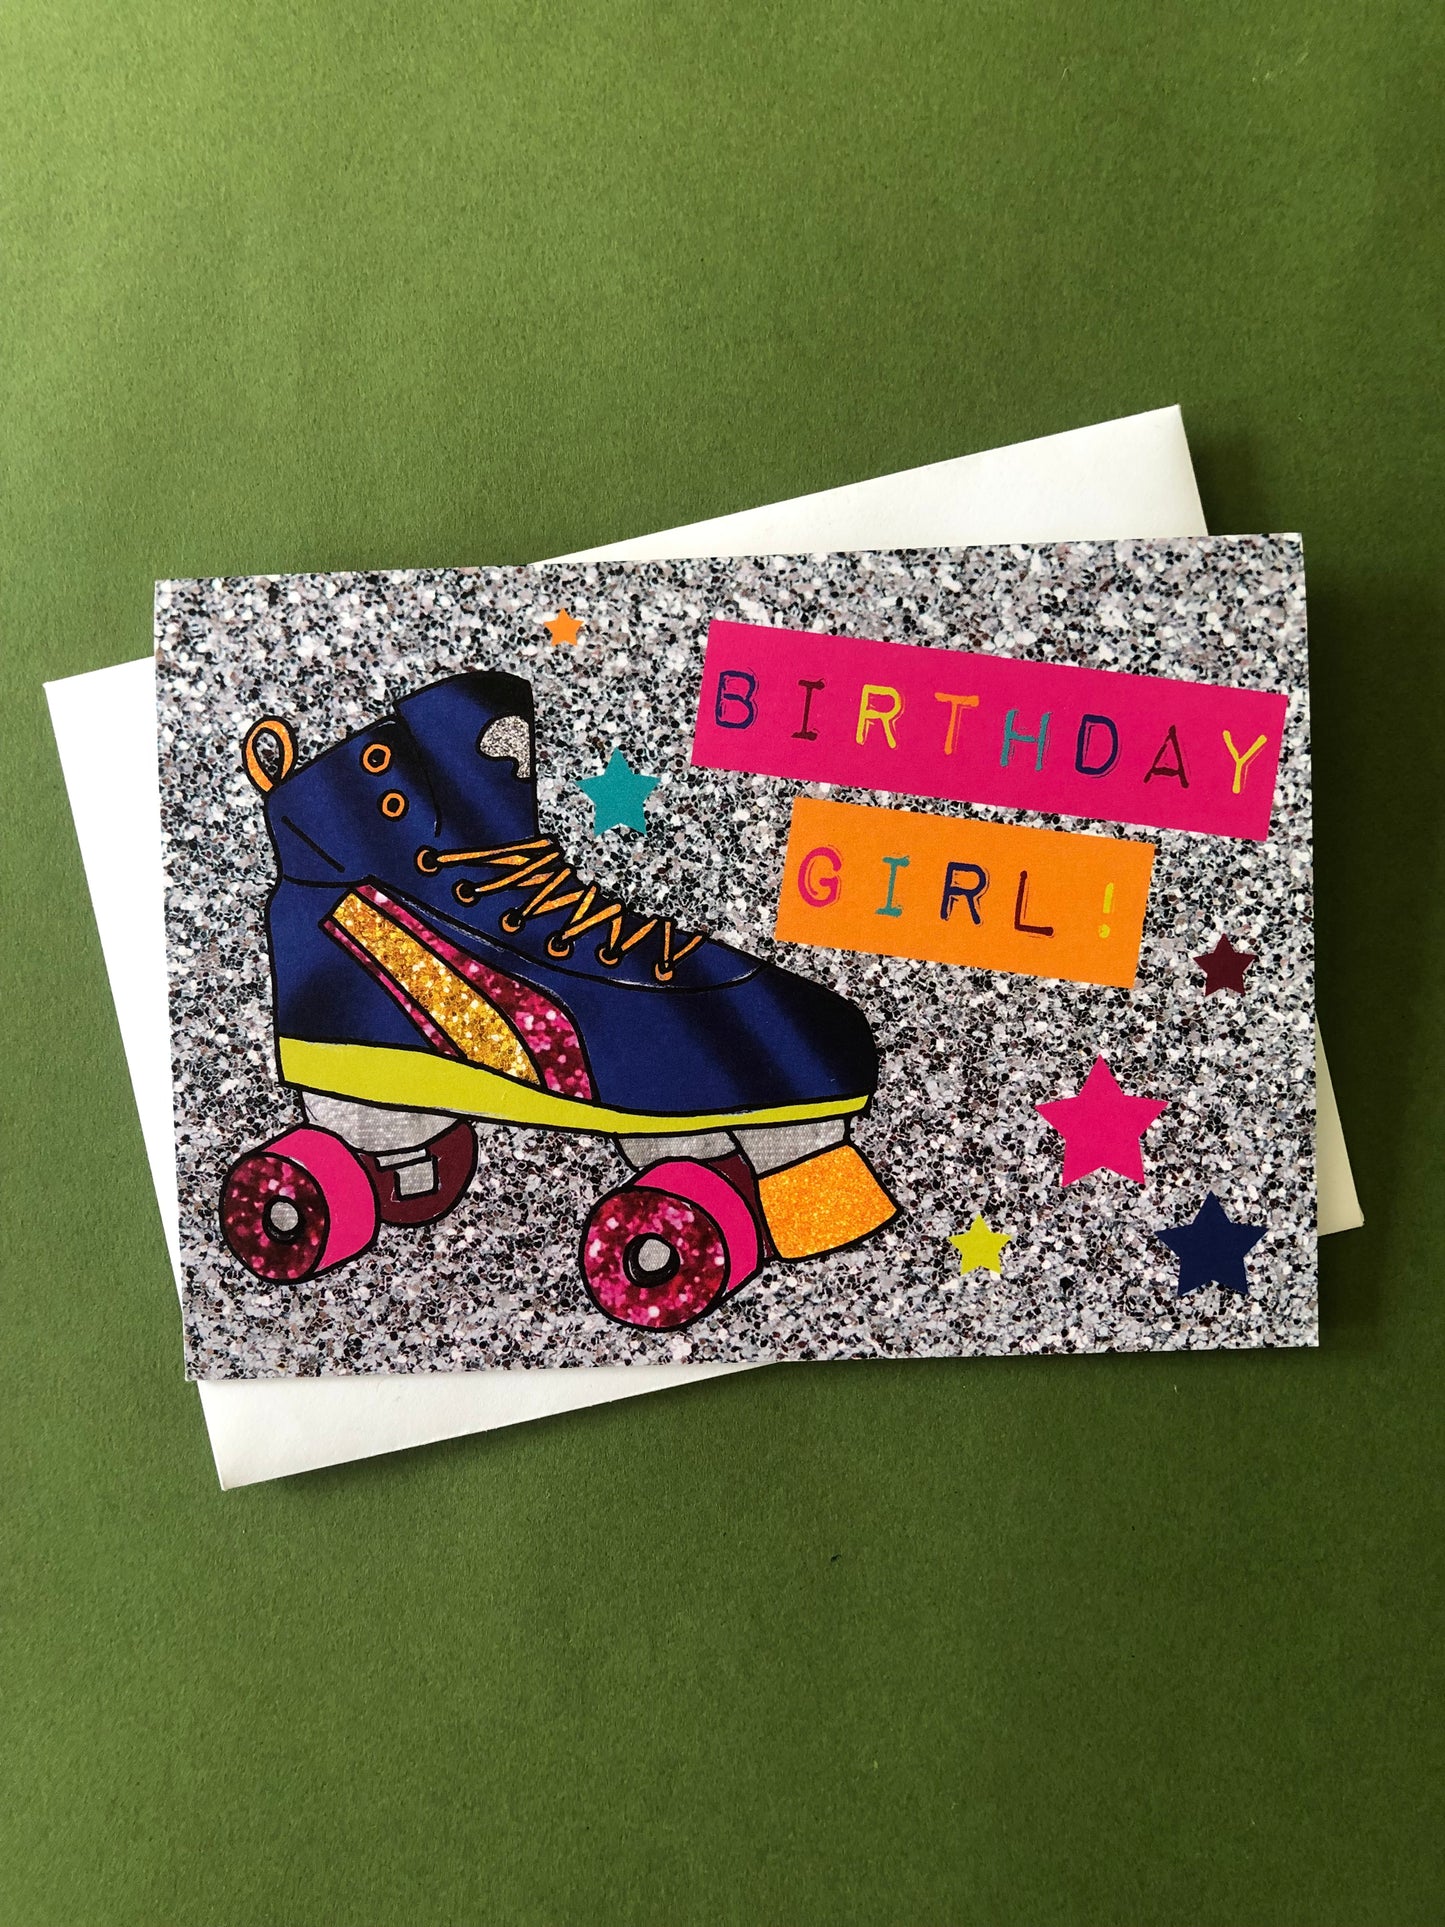 Neon and glitter rollerboot birthday girl card on a green background.